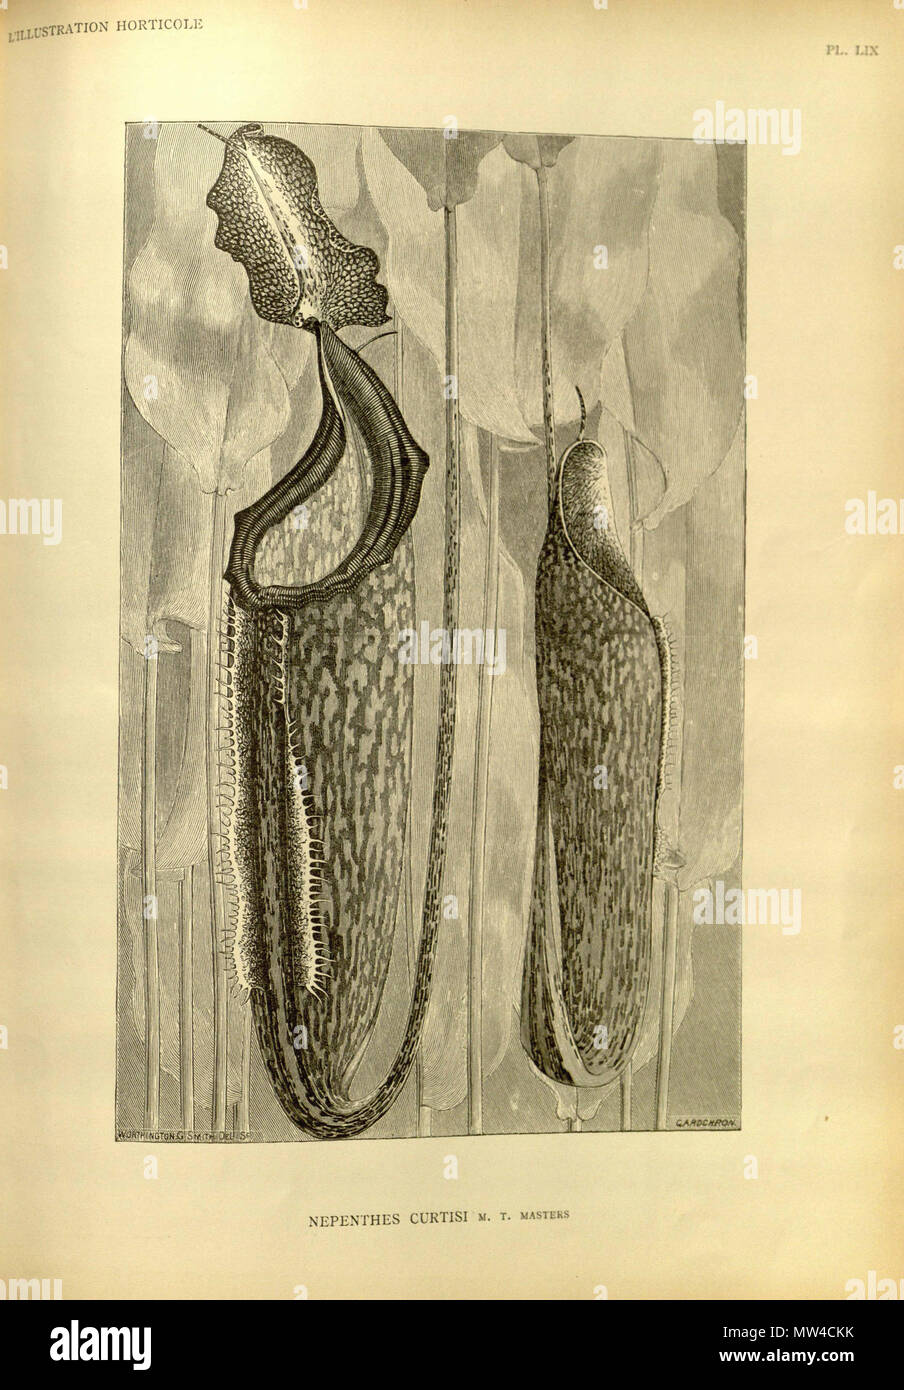 440 Nepenthes curtisii - L’Illustration horticole (1888) Stock Photo